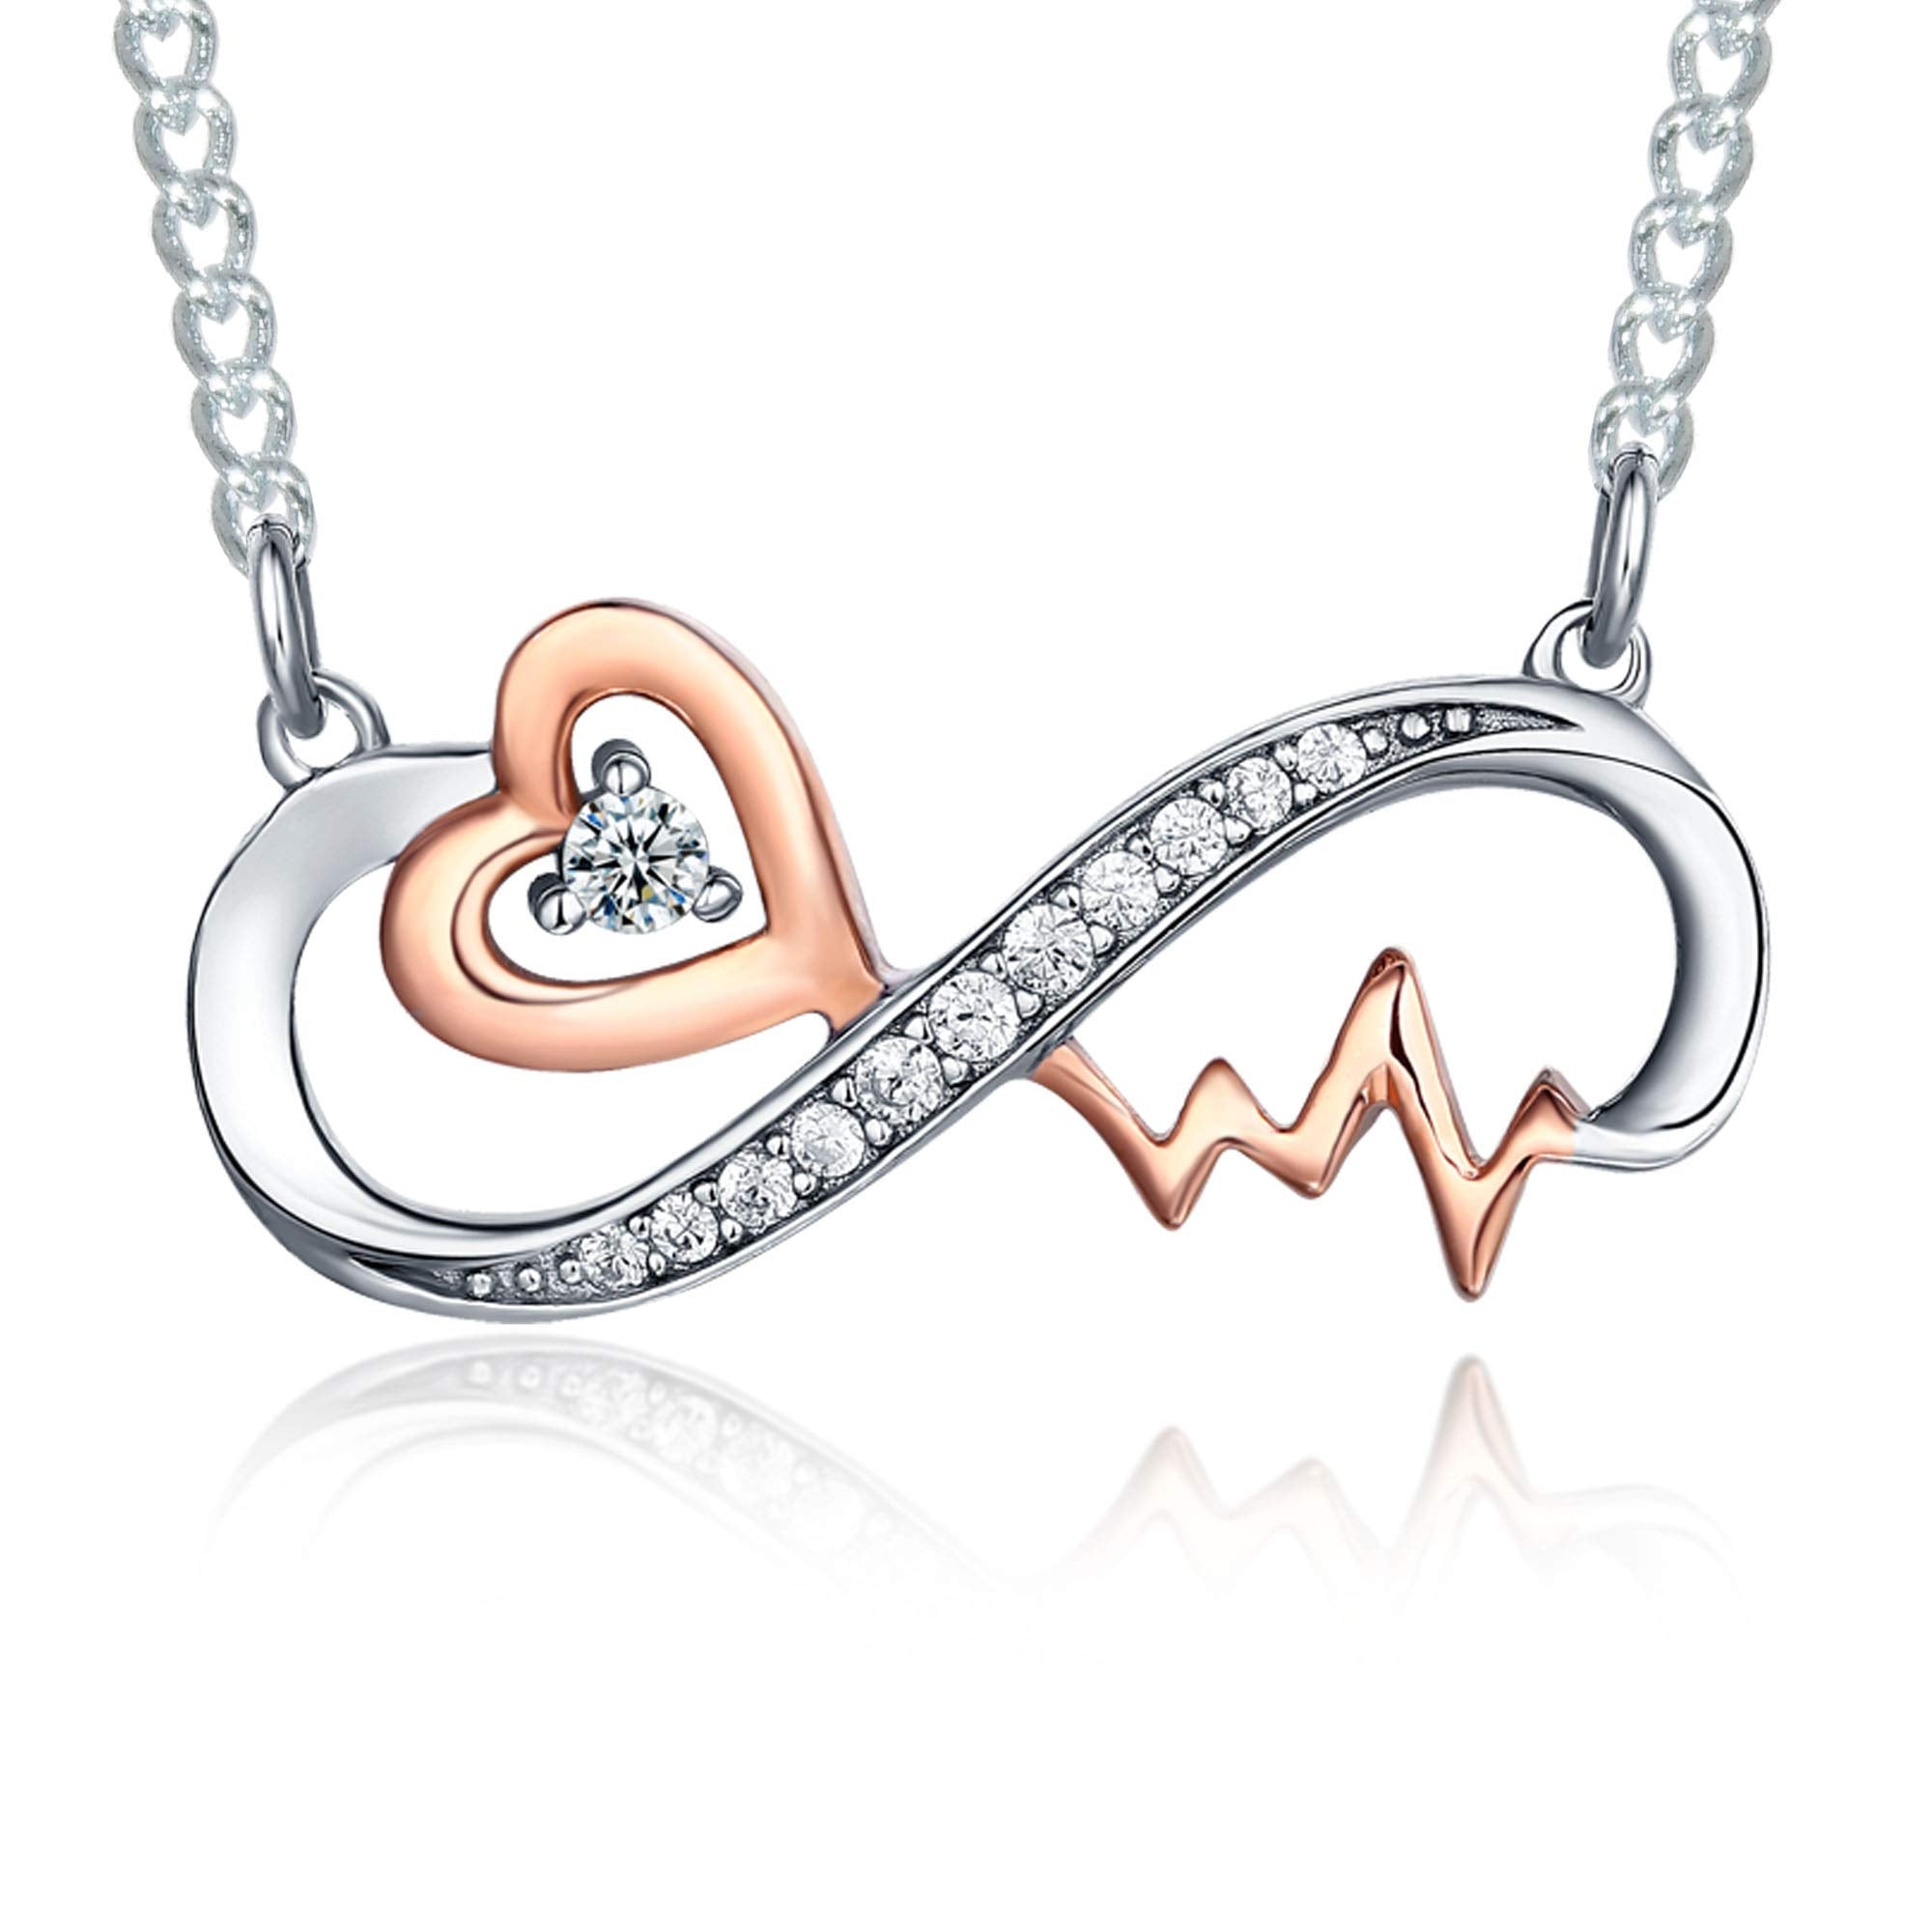 For Granddaughter - S925 Remember How Much You are Loved Infinity Heartbeat Necklace